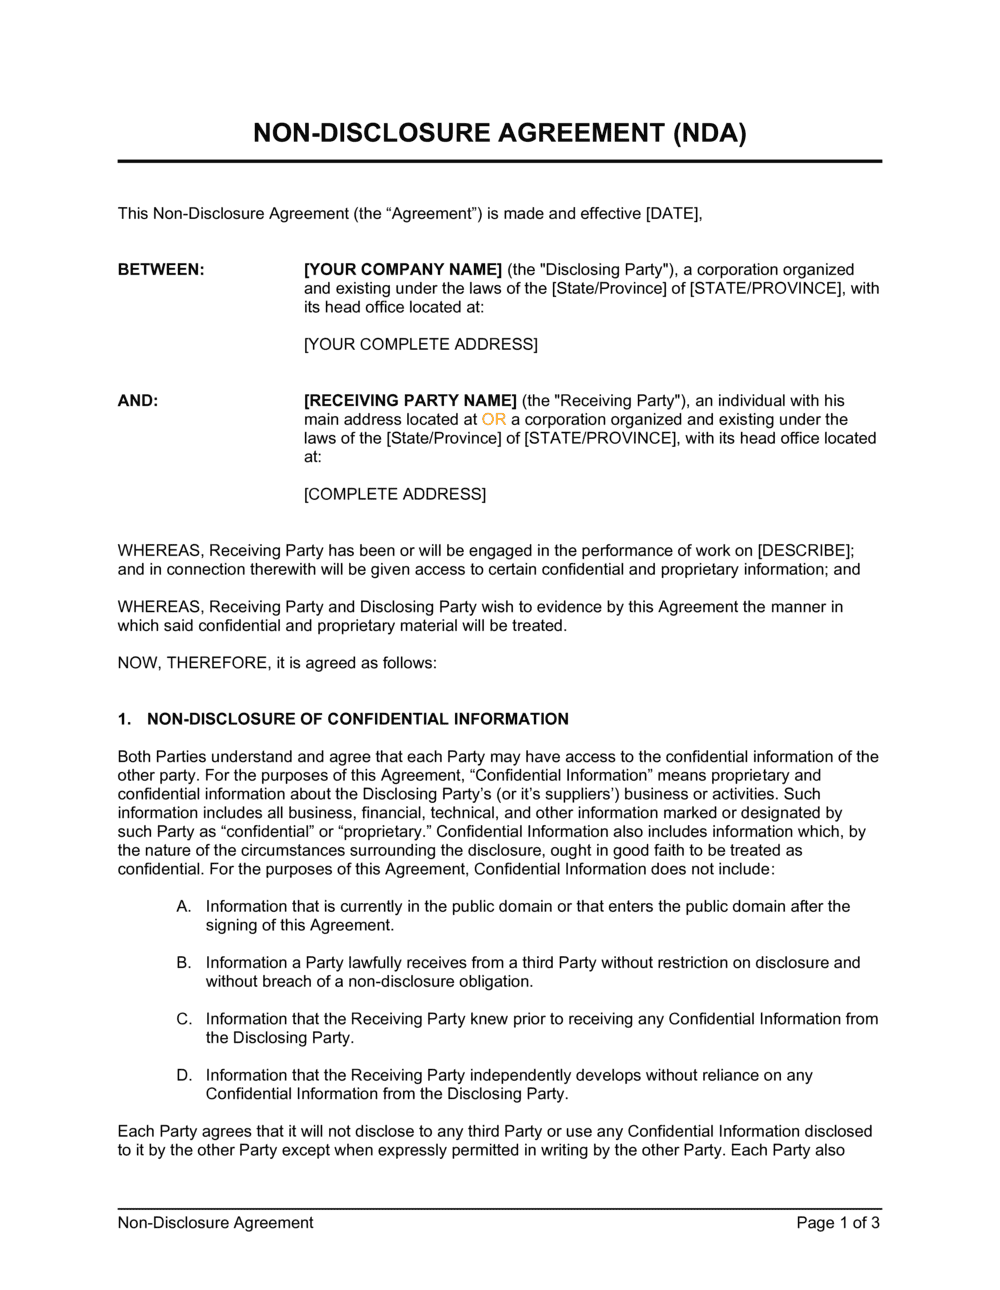 Non Disclosure Agreement Nda Template  by Business-in-a-Box™ With unilateral non disclosure agreement template